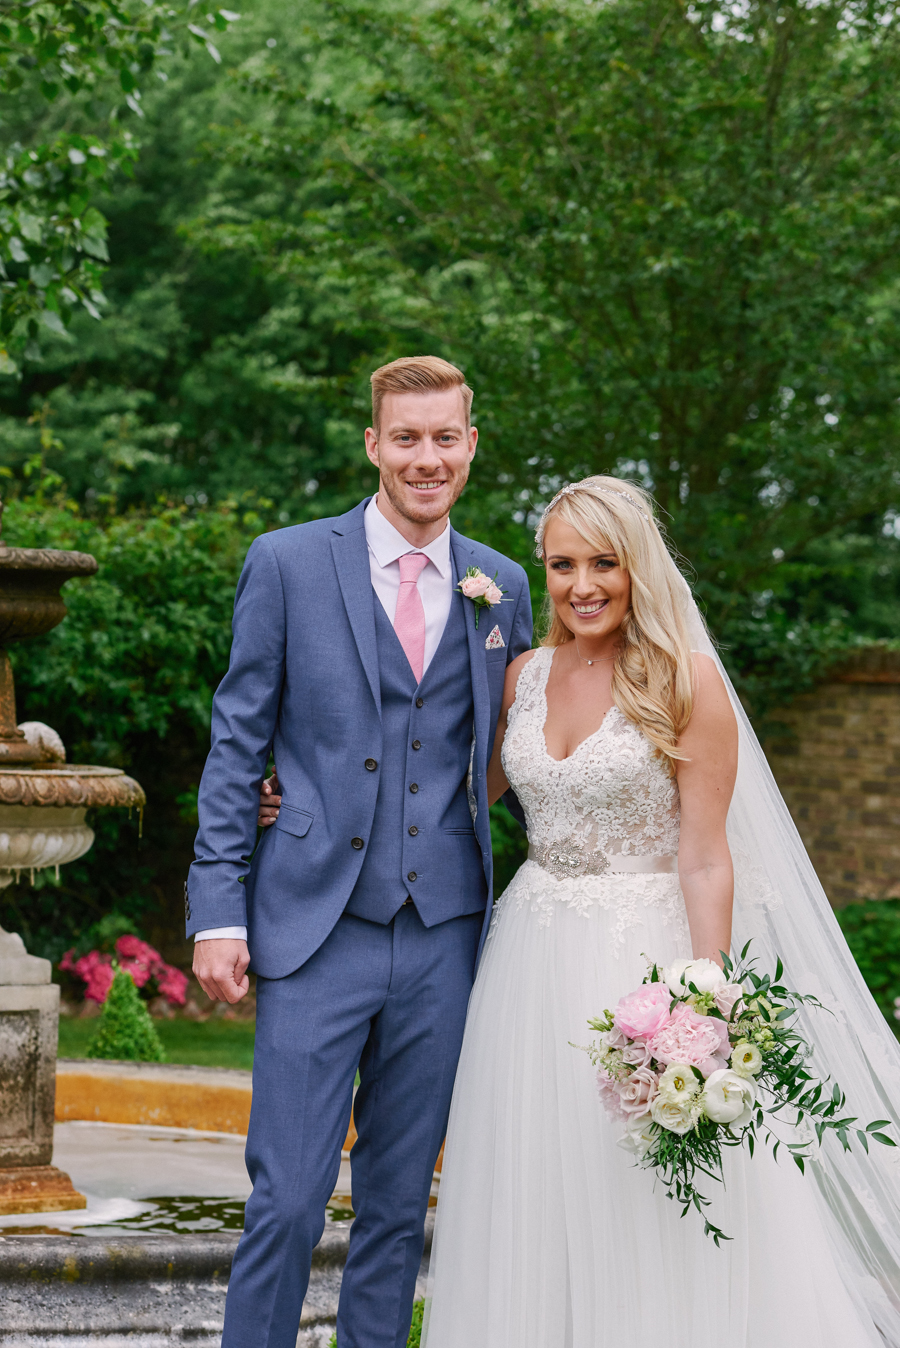 Penny and Ben's funfair wedding at Marleybrook with Rose Images (26)